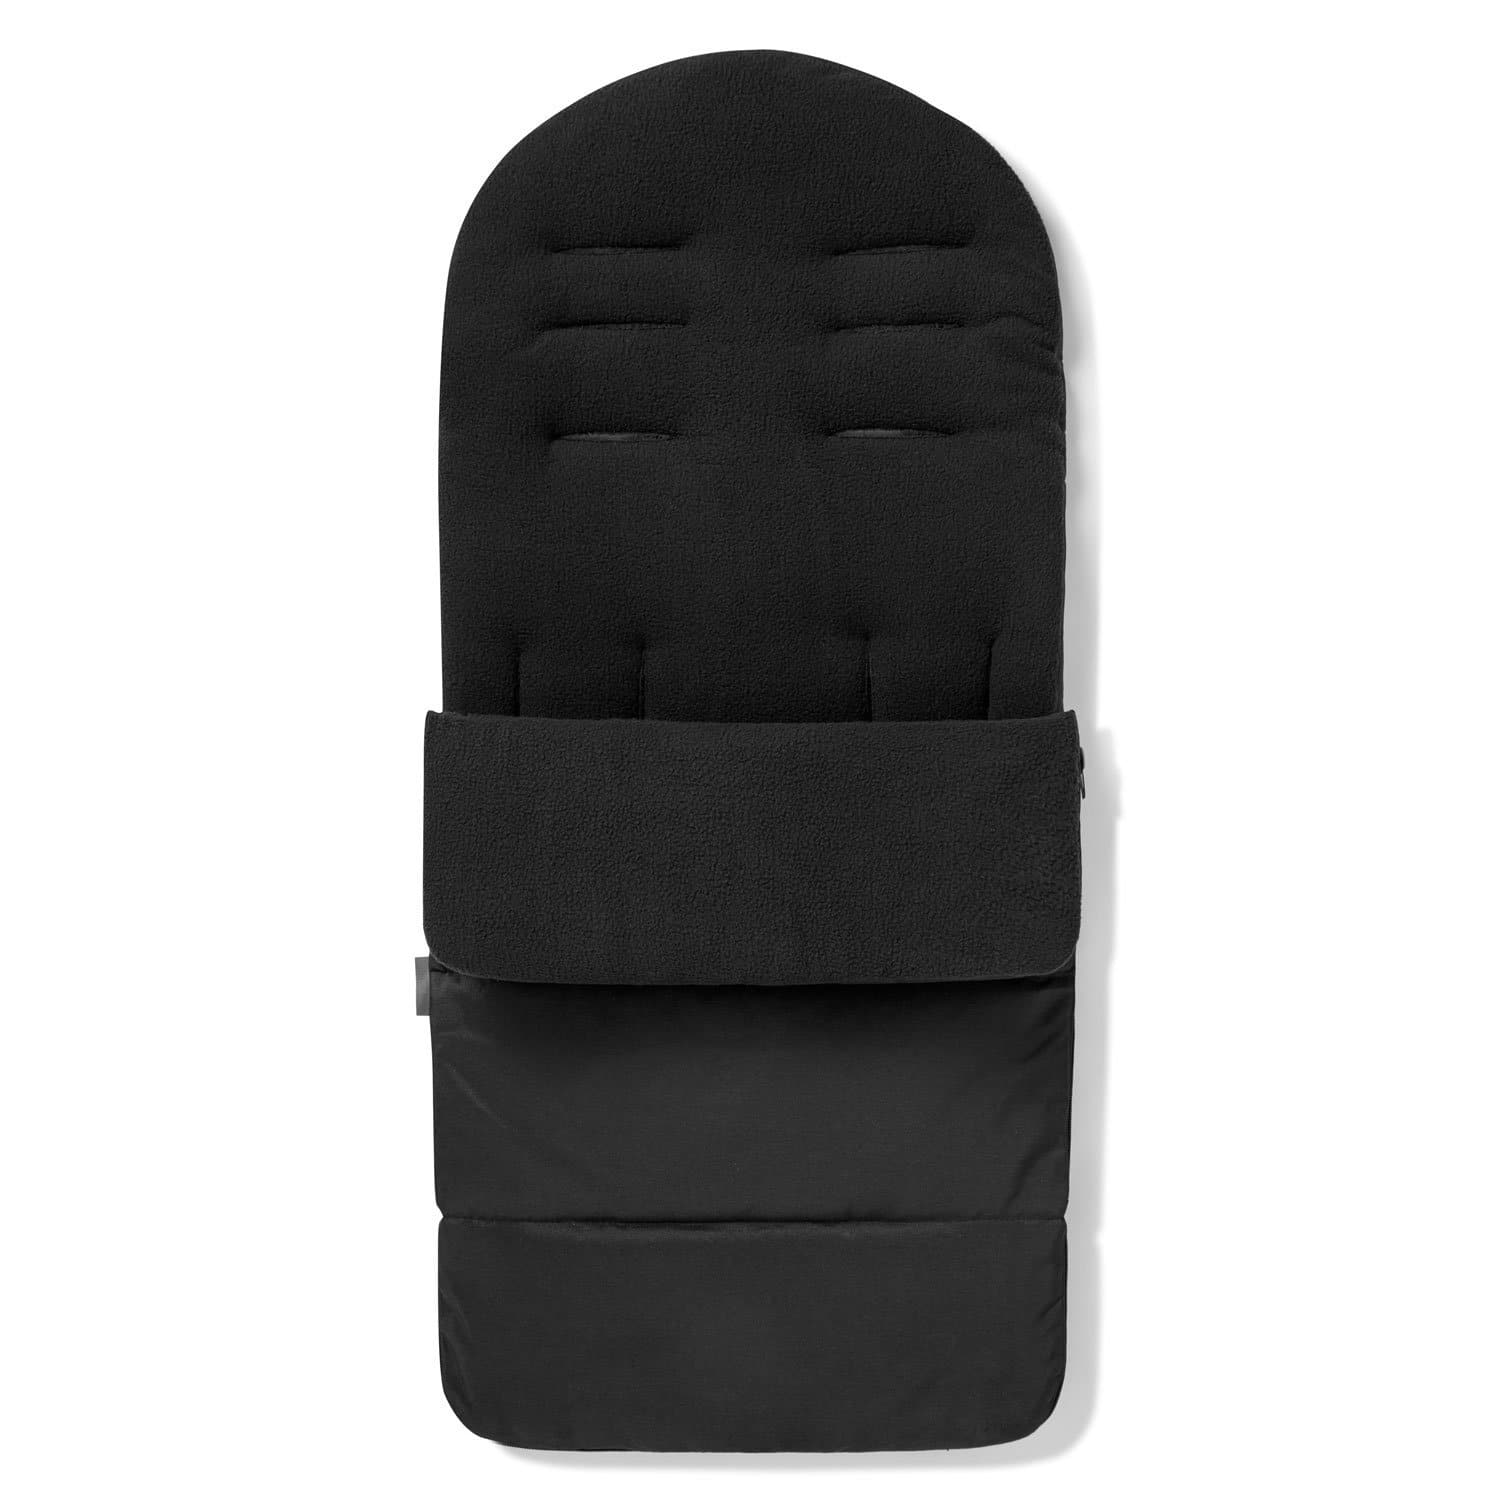 Premium Footmuff / Cosy Toes Compatible with Inglesina - For Your Little One